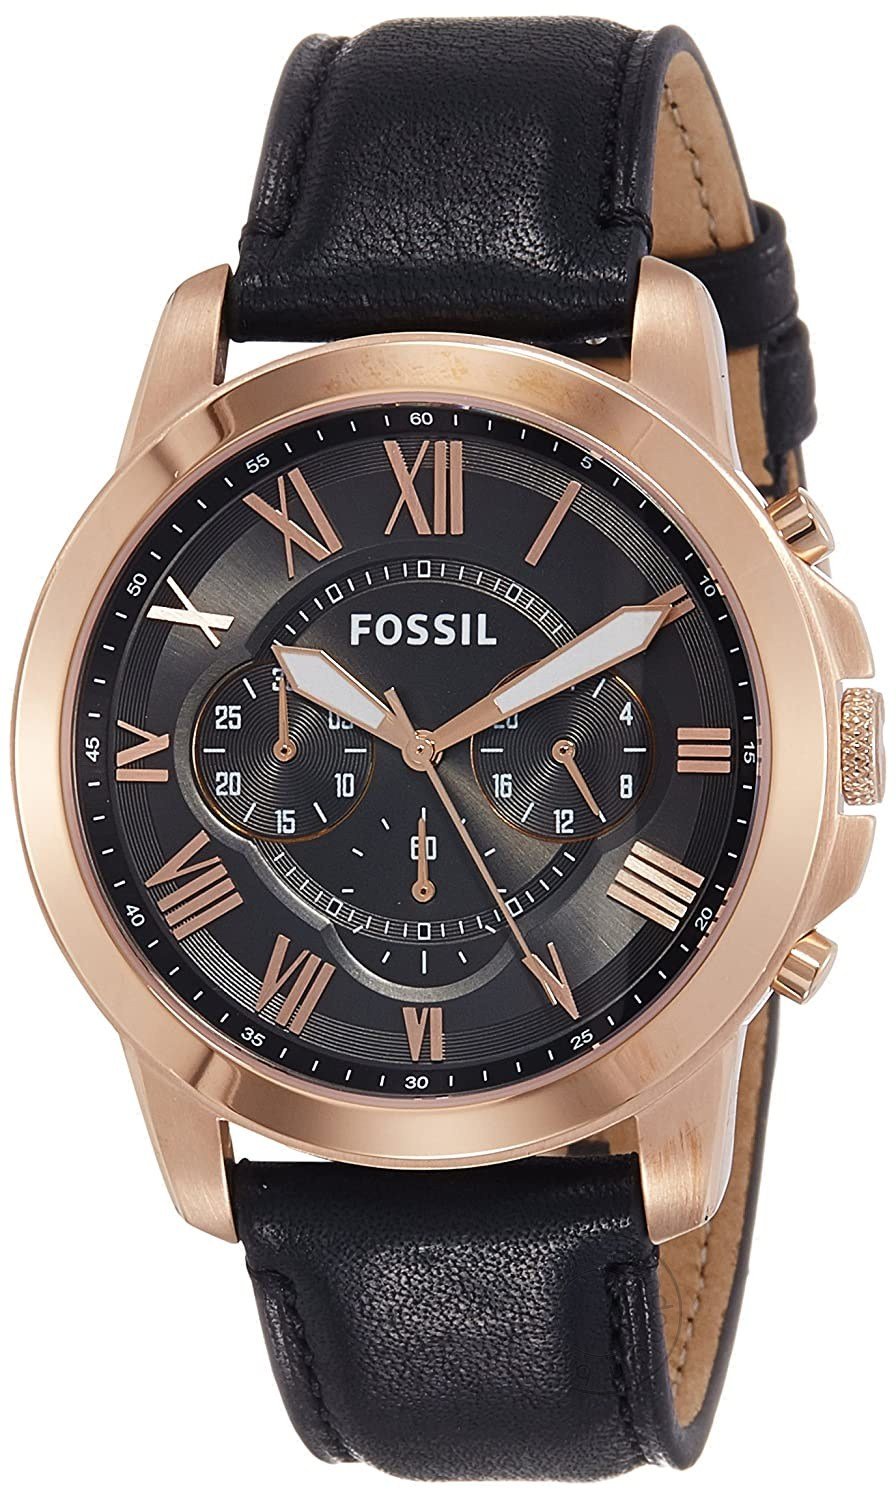 Fossil Chronograph Black Men's Watch For Man Leather Casual Formal Gift Fs5085